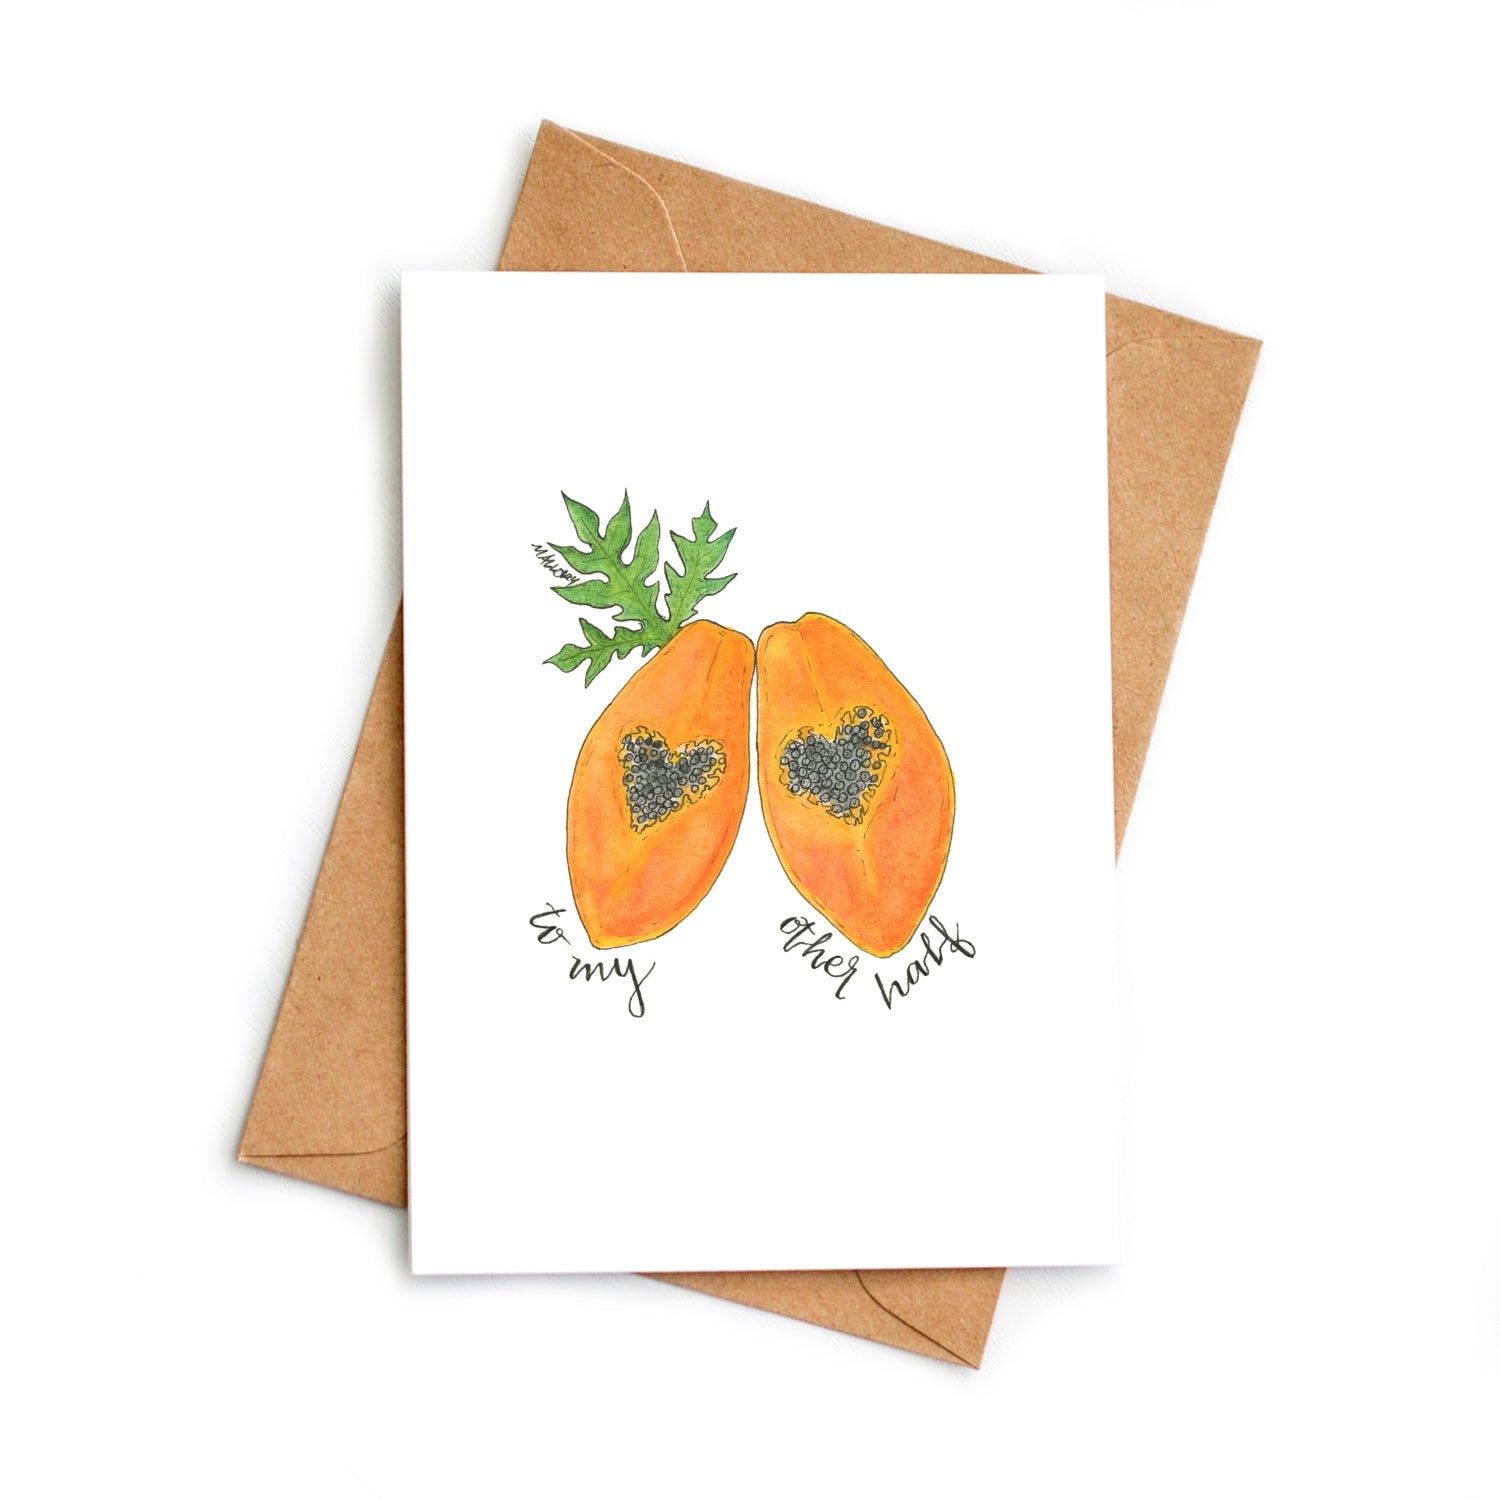 Image depicts a Valentine's Day card with an orange papaya that is sliced open with the black papaya seeds in the shape of a heart. A papaya leaf is behind the papaya and the words, "to my other half" are hand-lettered below.